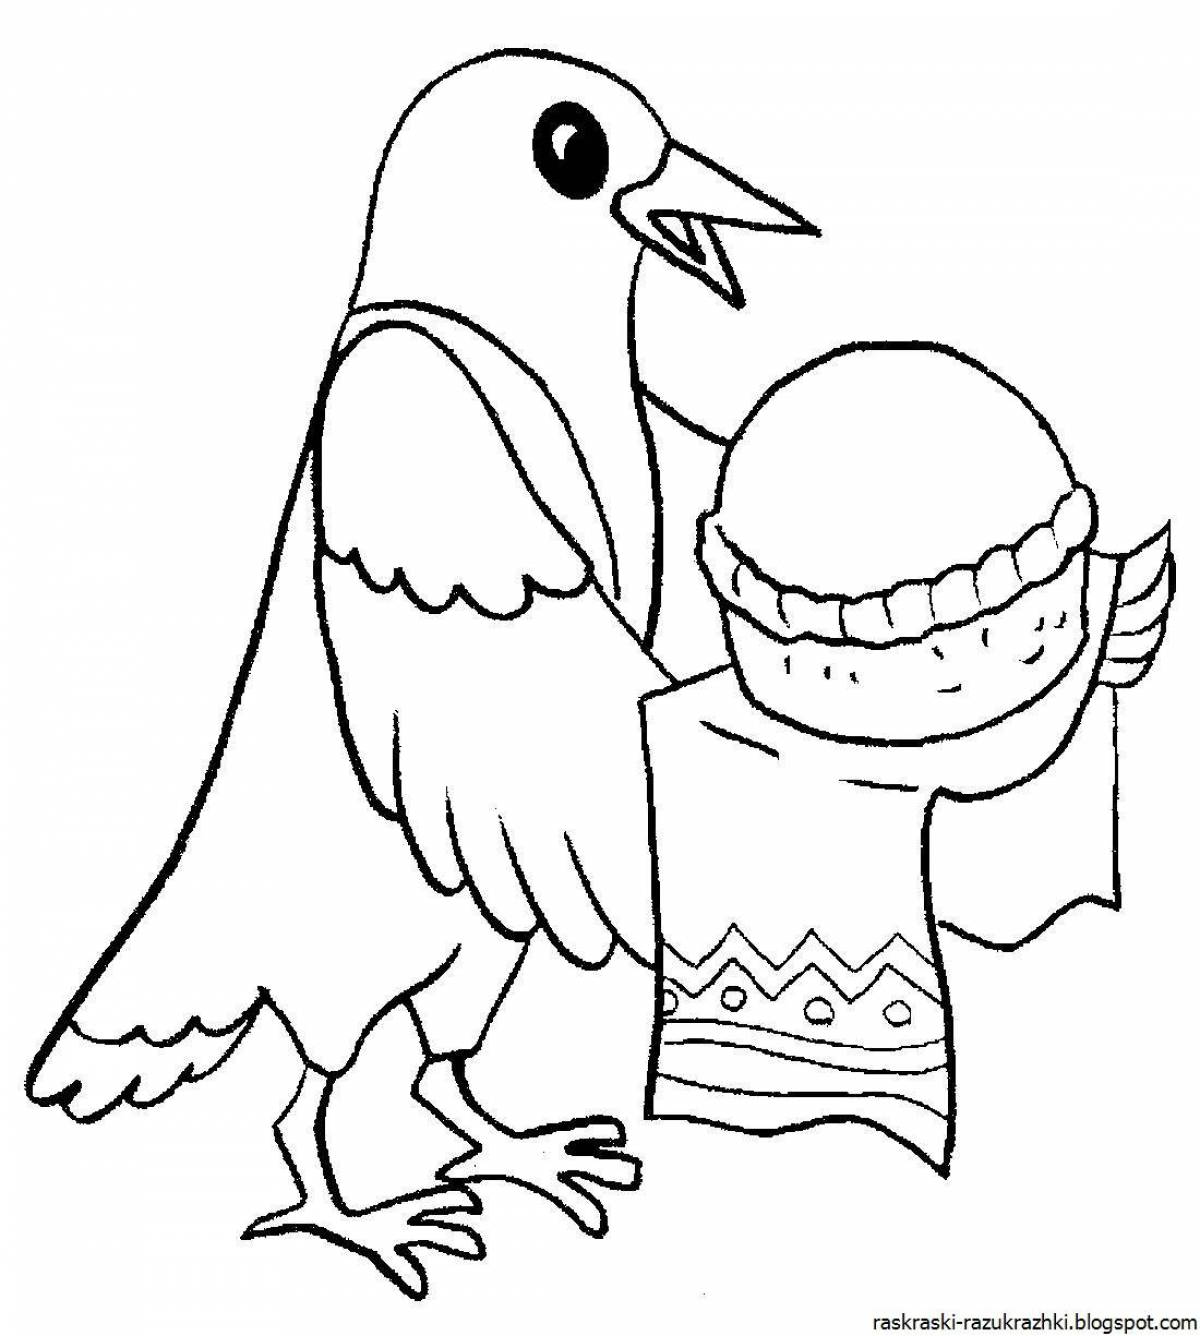 Fancy magpie coloring book for kids